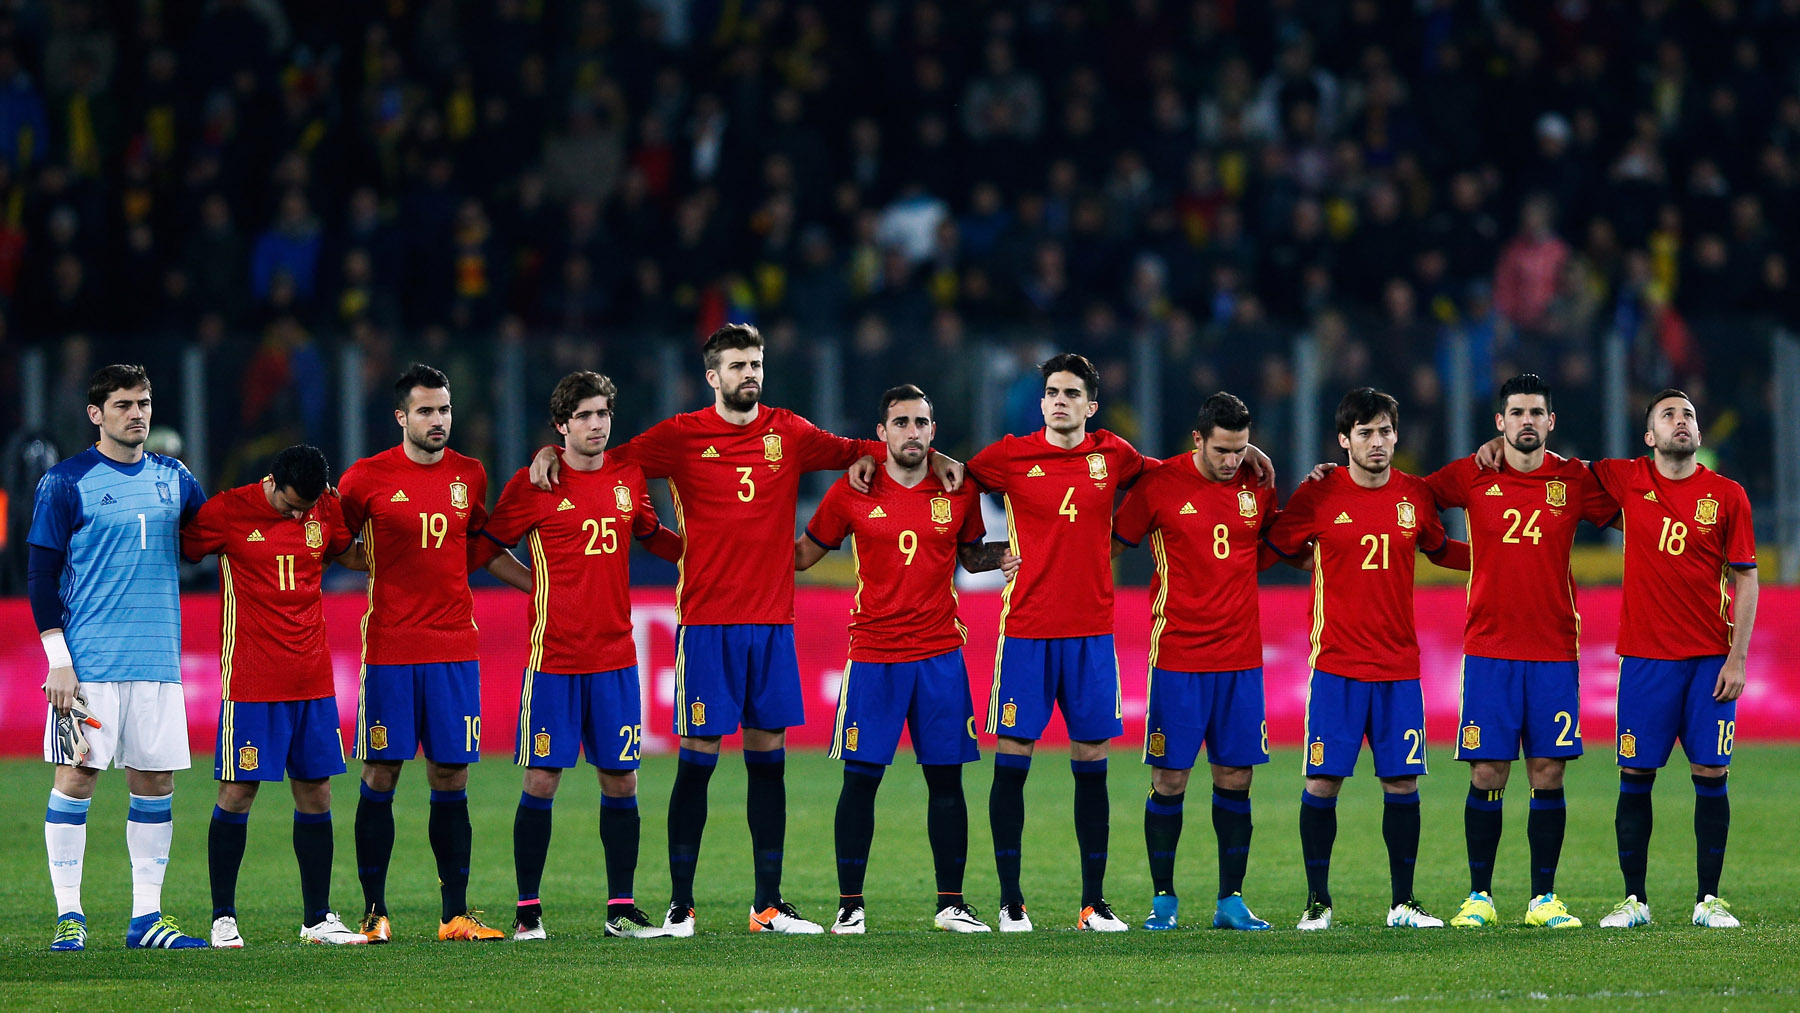 CLUJ-NAPOCA, ROMANIA - MARCH 27: The teams of Spain and Romania stop for a minute's silence to remember Johan Cruyff of Netherlands prior to the International Friendly match between Romania and Spain held at the Cluj Arena on March 27, 2016 in Cluj-Napoca, Romania. (Photo by Dean Mouhtaropoulos/Getty Images)